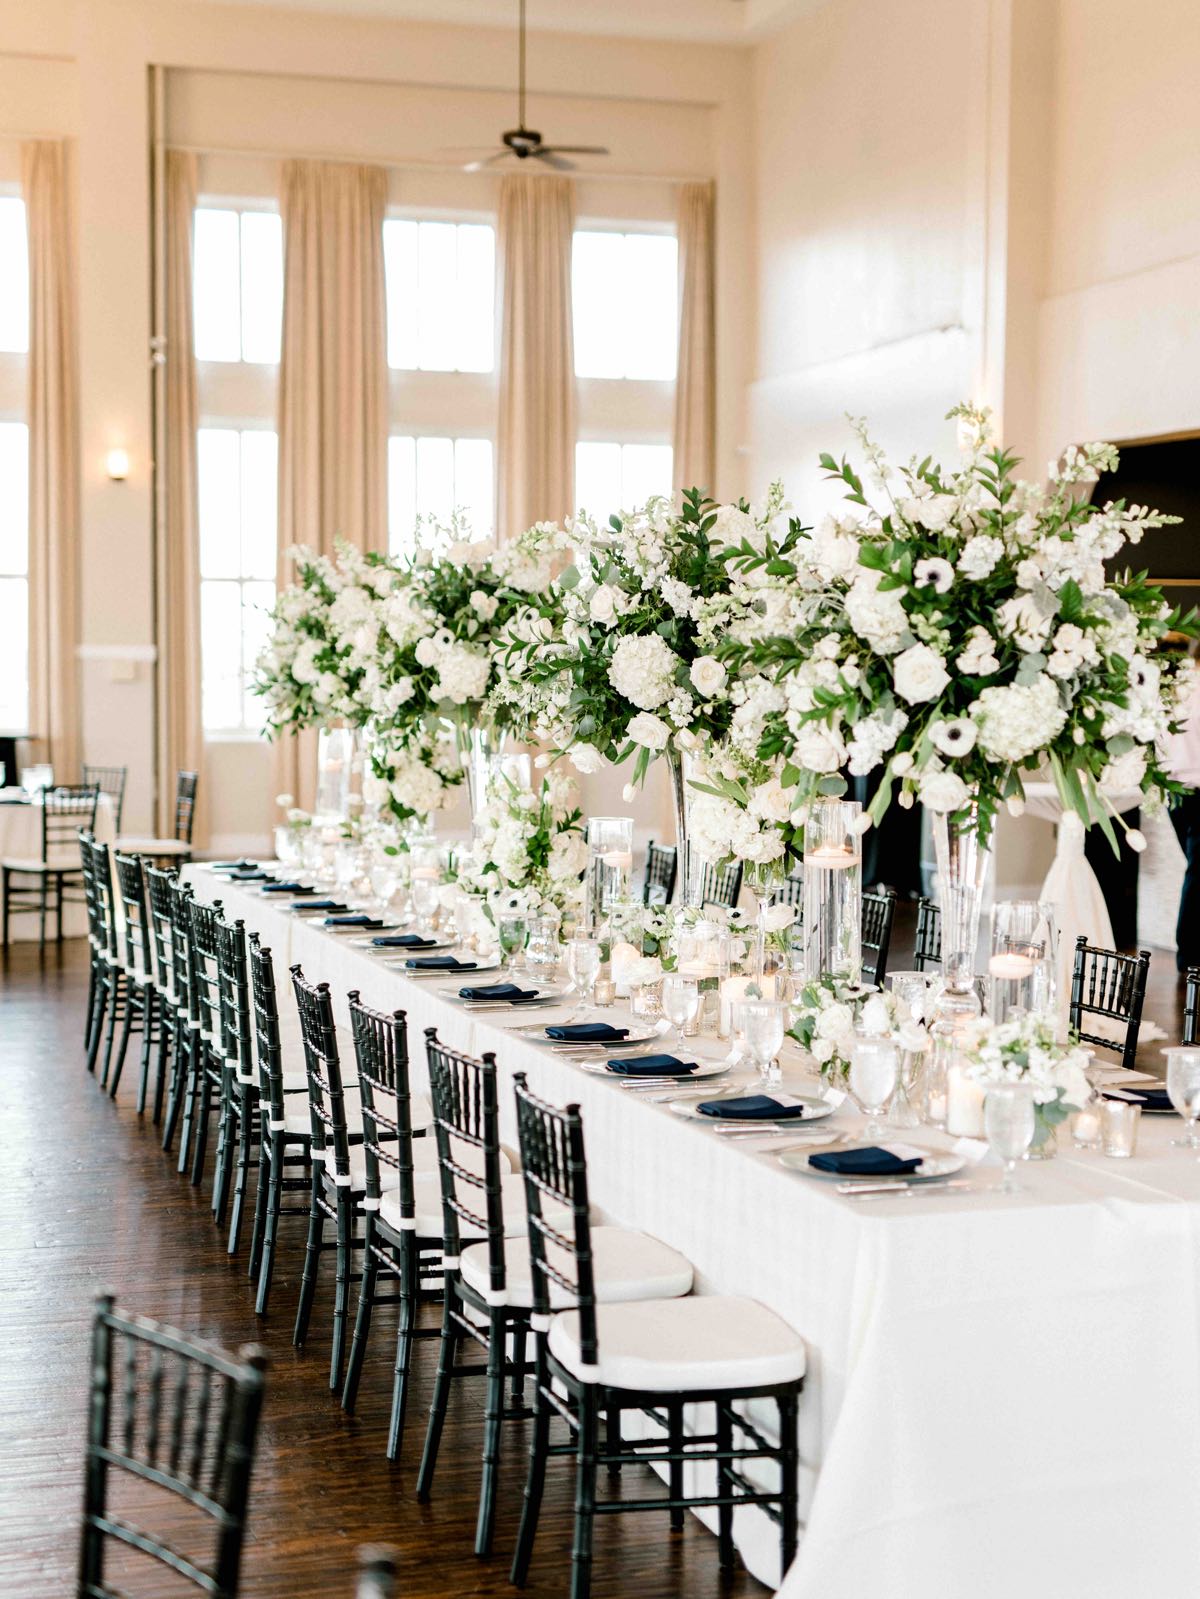 48 Green White Tall Centerpieces Room on Main Wedding